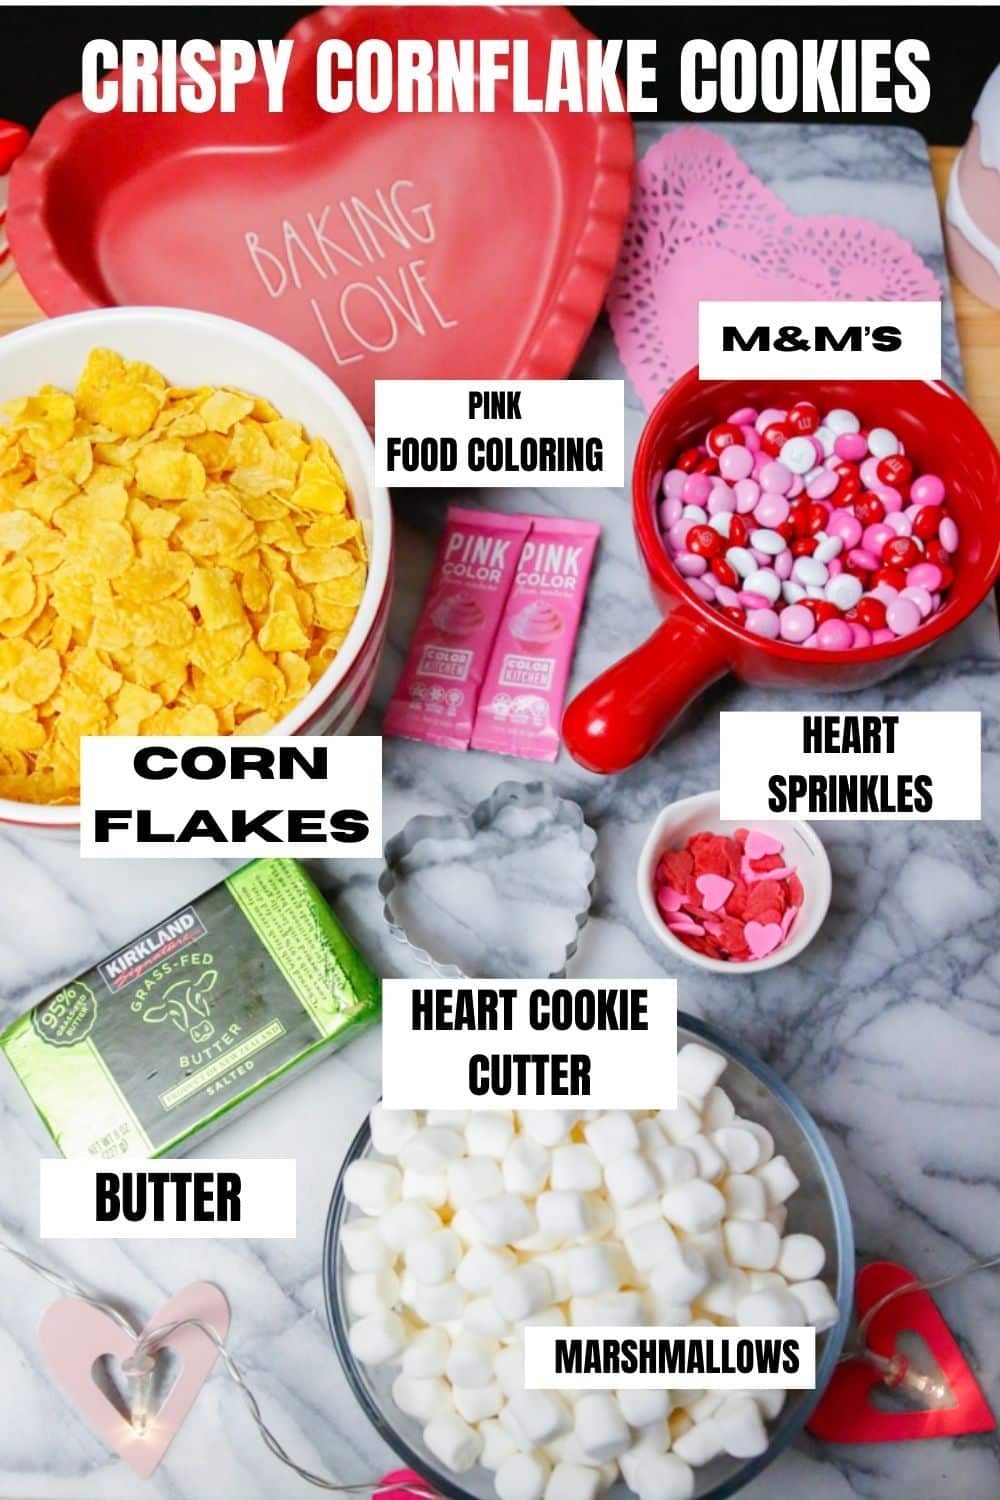 ingredients for crispy cornflake cookies including mini marshmallows, pink food coloring, cornflakes, m&m's, heart sprinkles, butter, heart shaped cookie cutter 